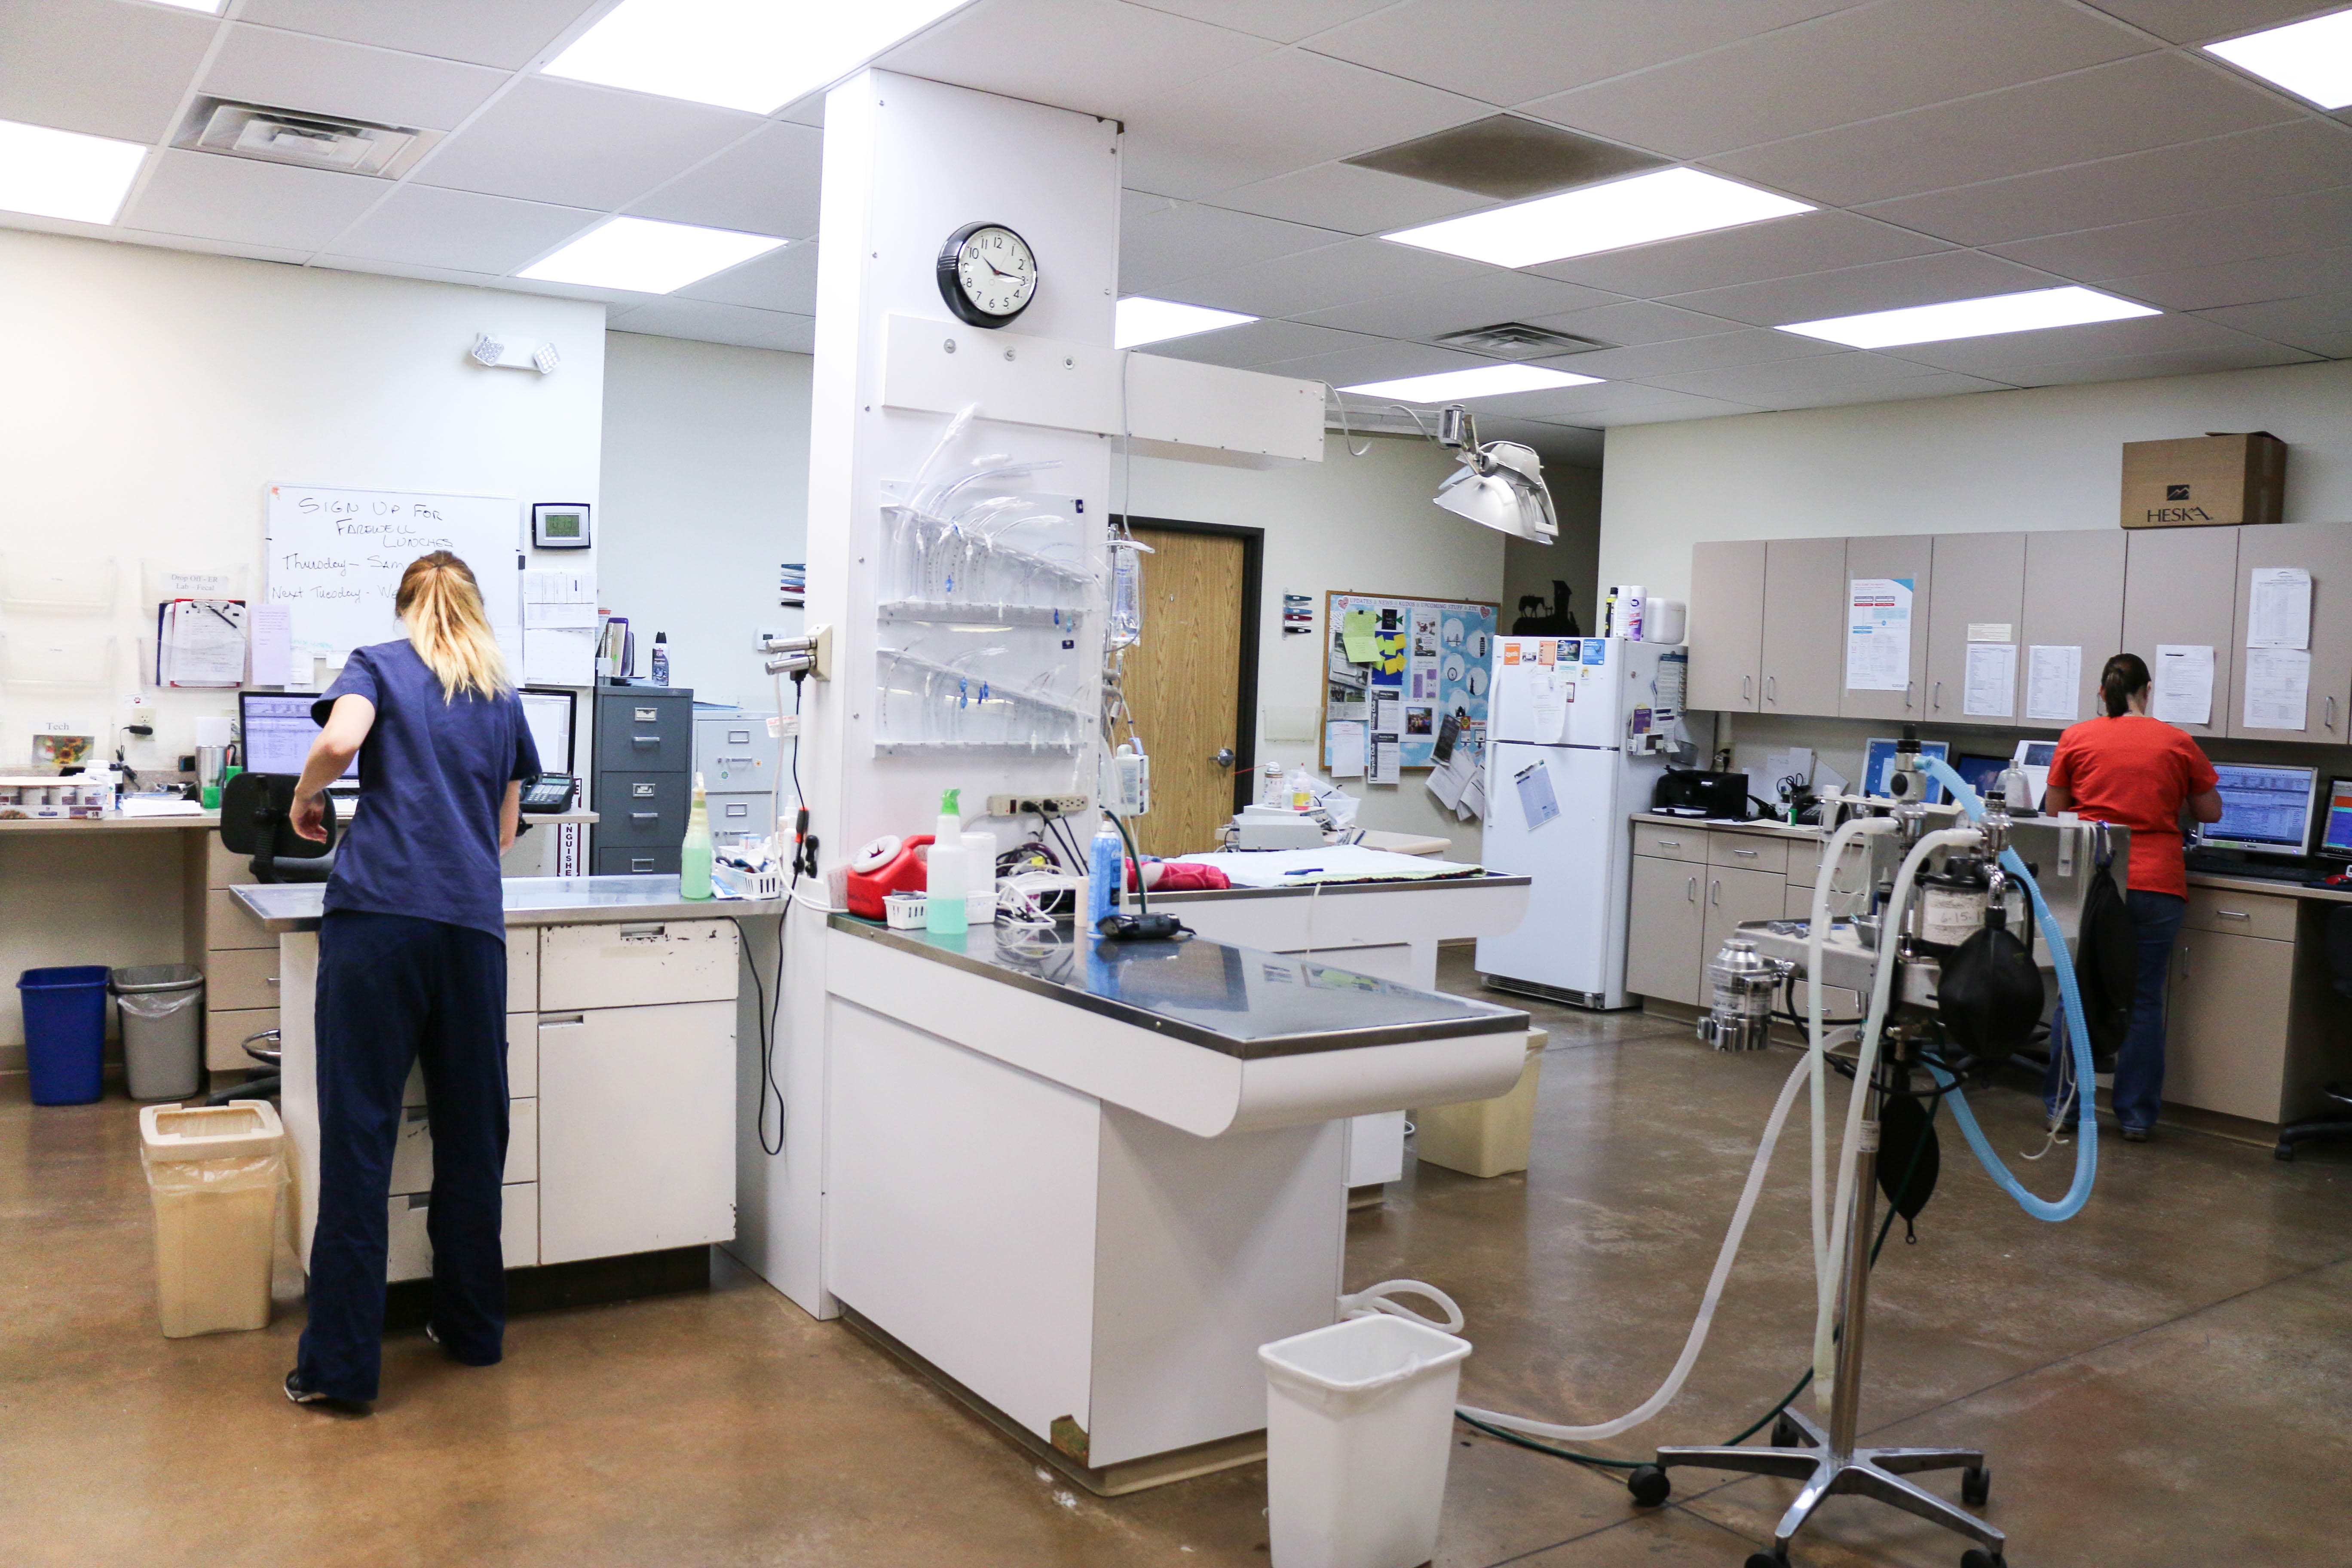 Your pet’s safety and comfort are top priorities for us. That’s why we take cleanliness so seriously. Our treatment area is always sterilized between patients, and the space is kept tidy so that your pet will not be overwhelmed.